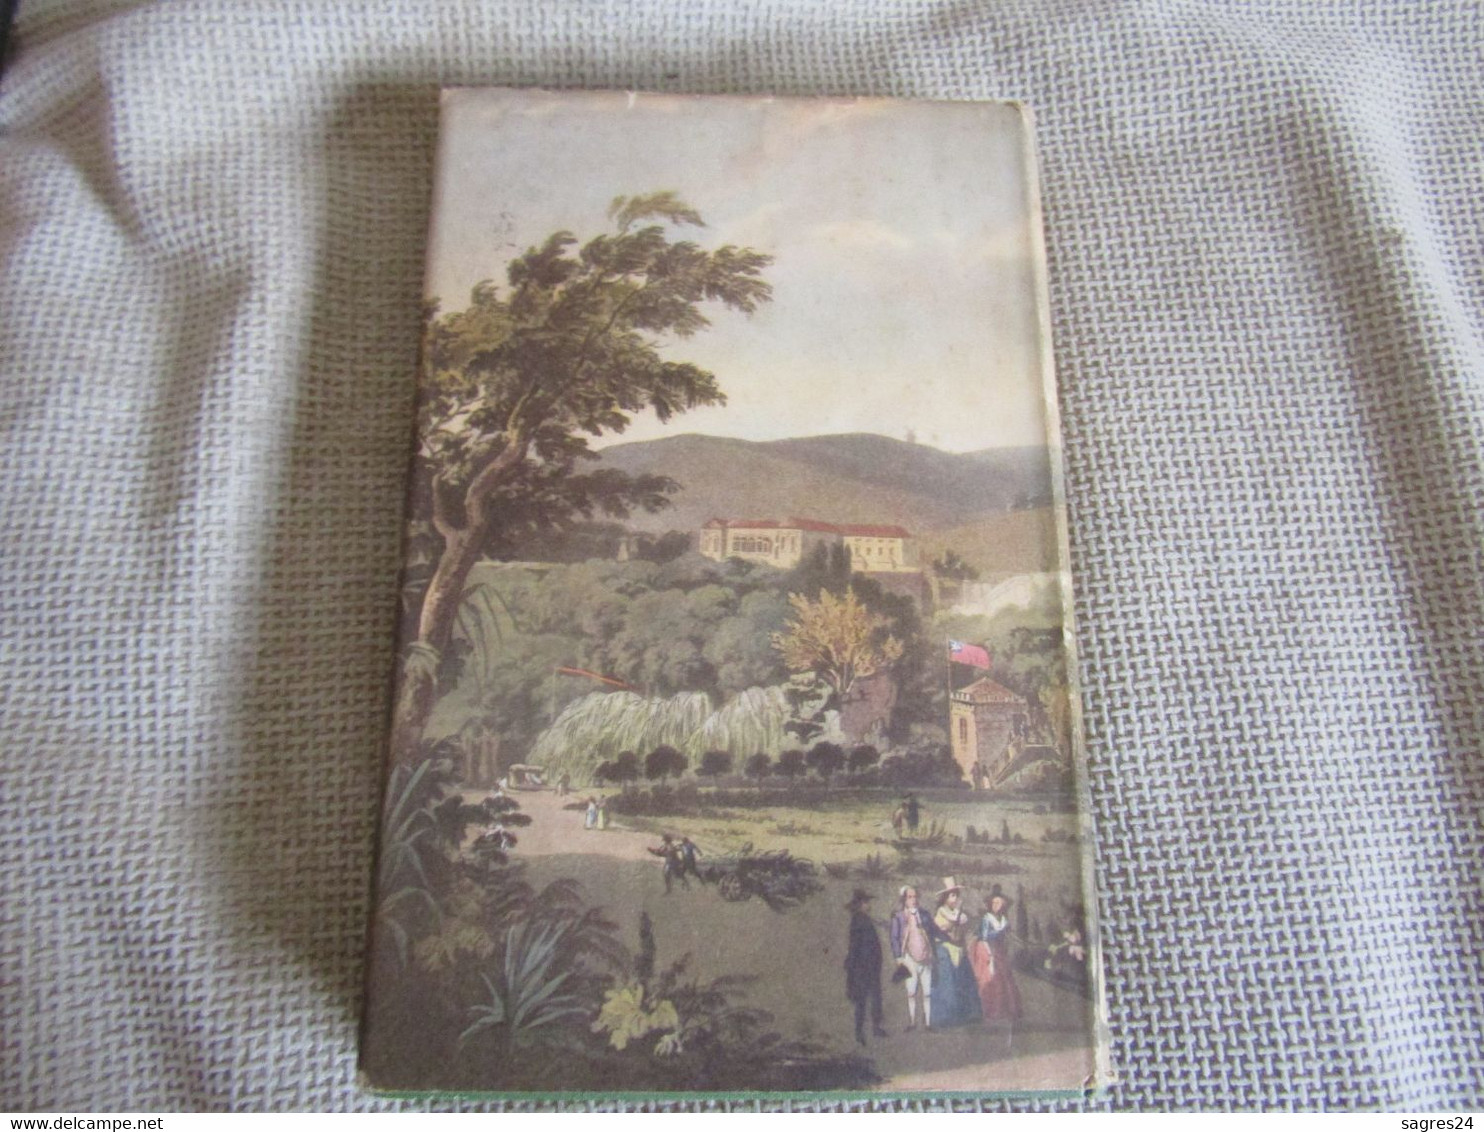 Sacheverell Sitwell - Portugal And Madeira - Hardcover - 1954 First Sedition - 1950-Heute